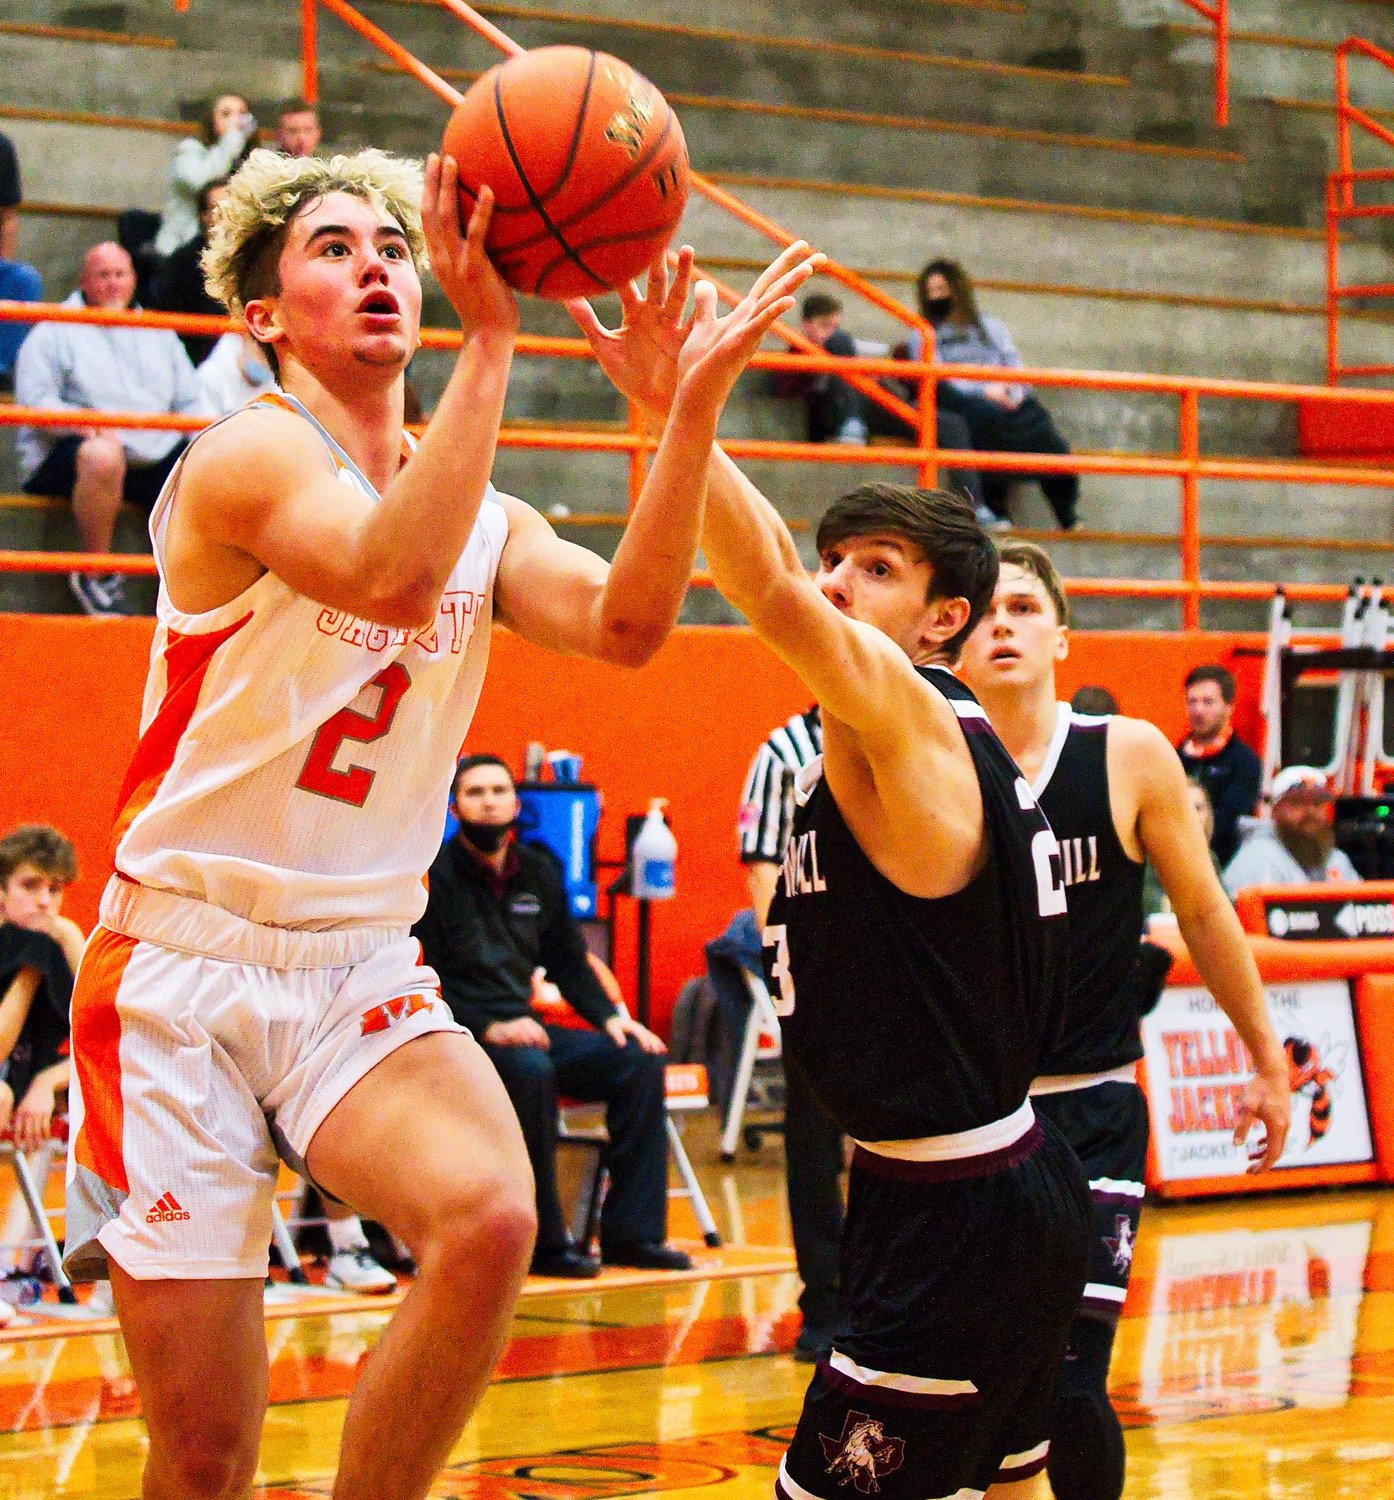 T.J. Moreland of Mineola goes in for a score against Martin’s Mill. [more shots here]